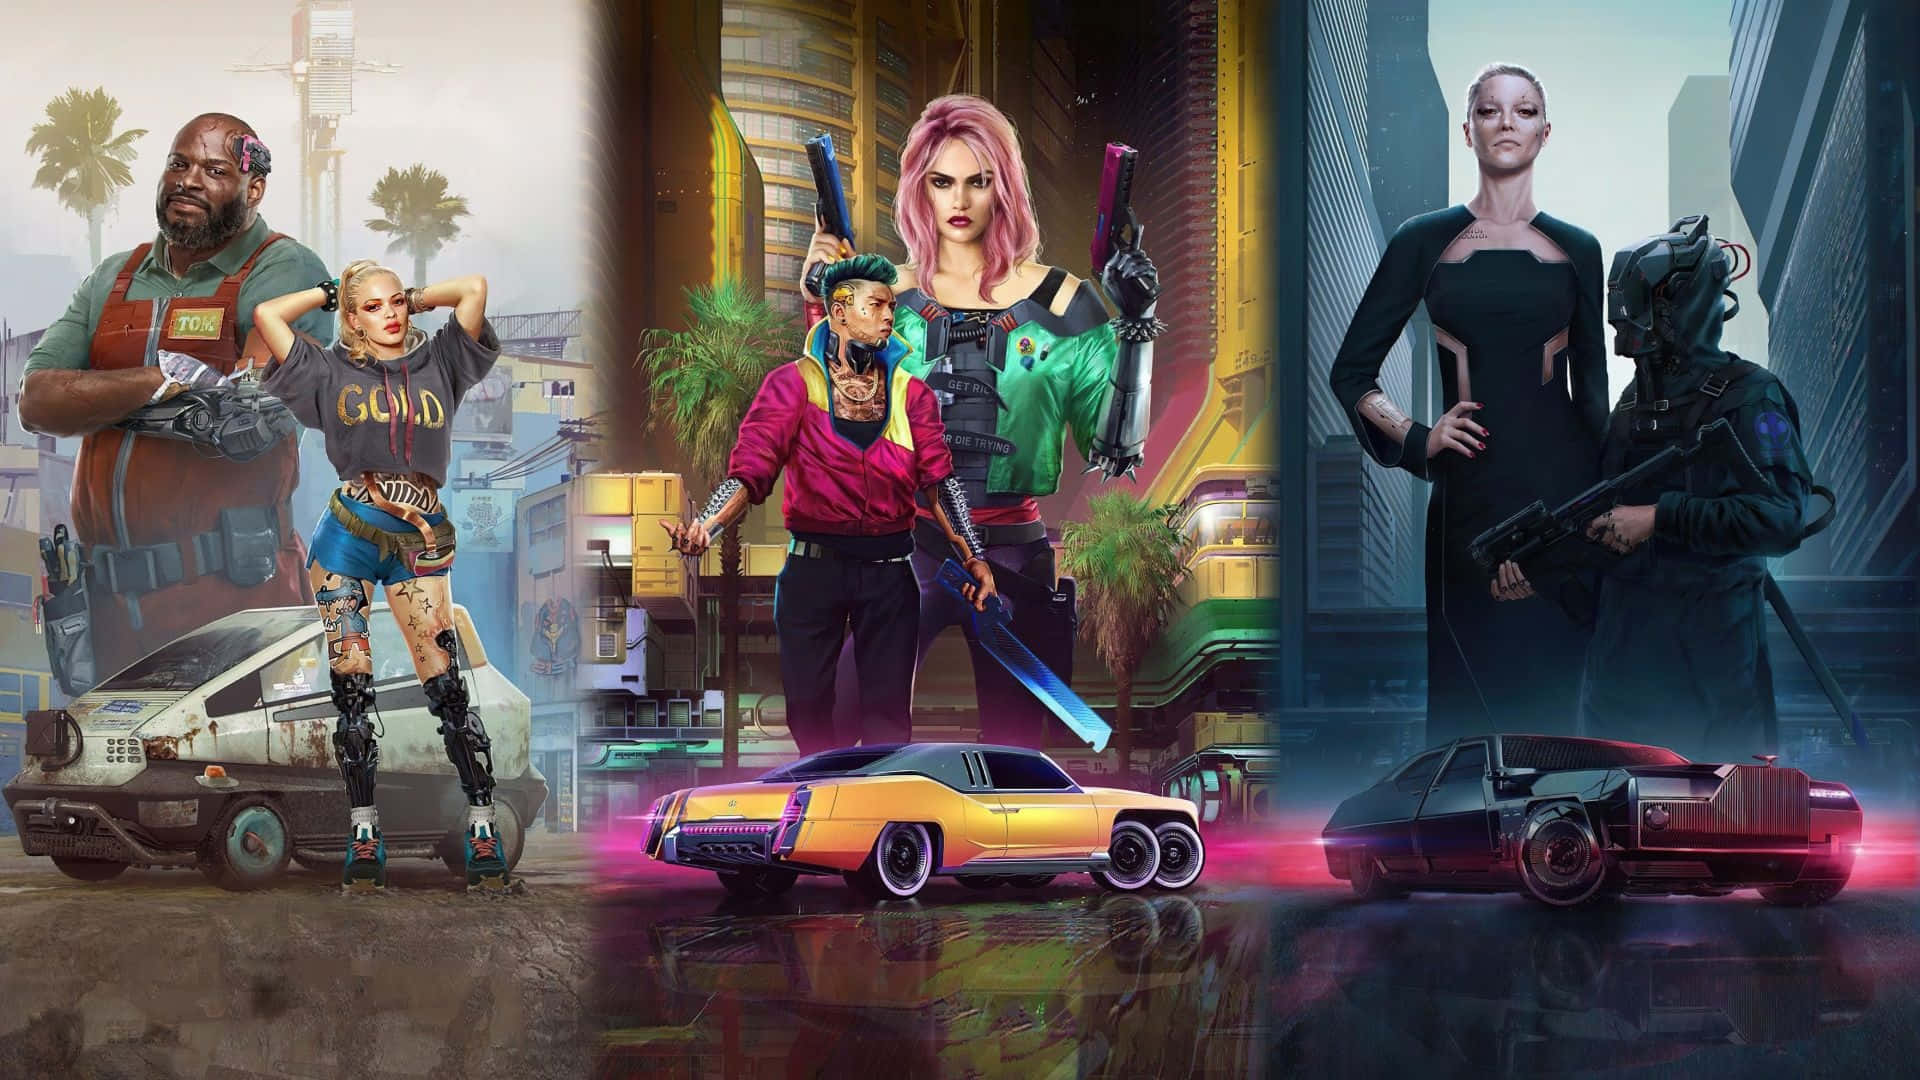 The Iconic Cyberpunk 2077 Characters in Night City Wallpaper